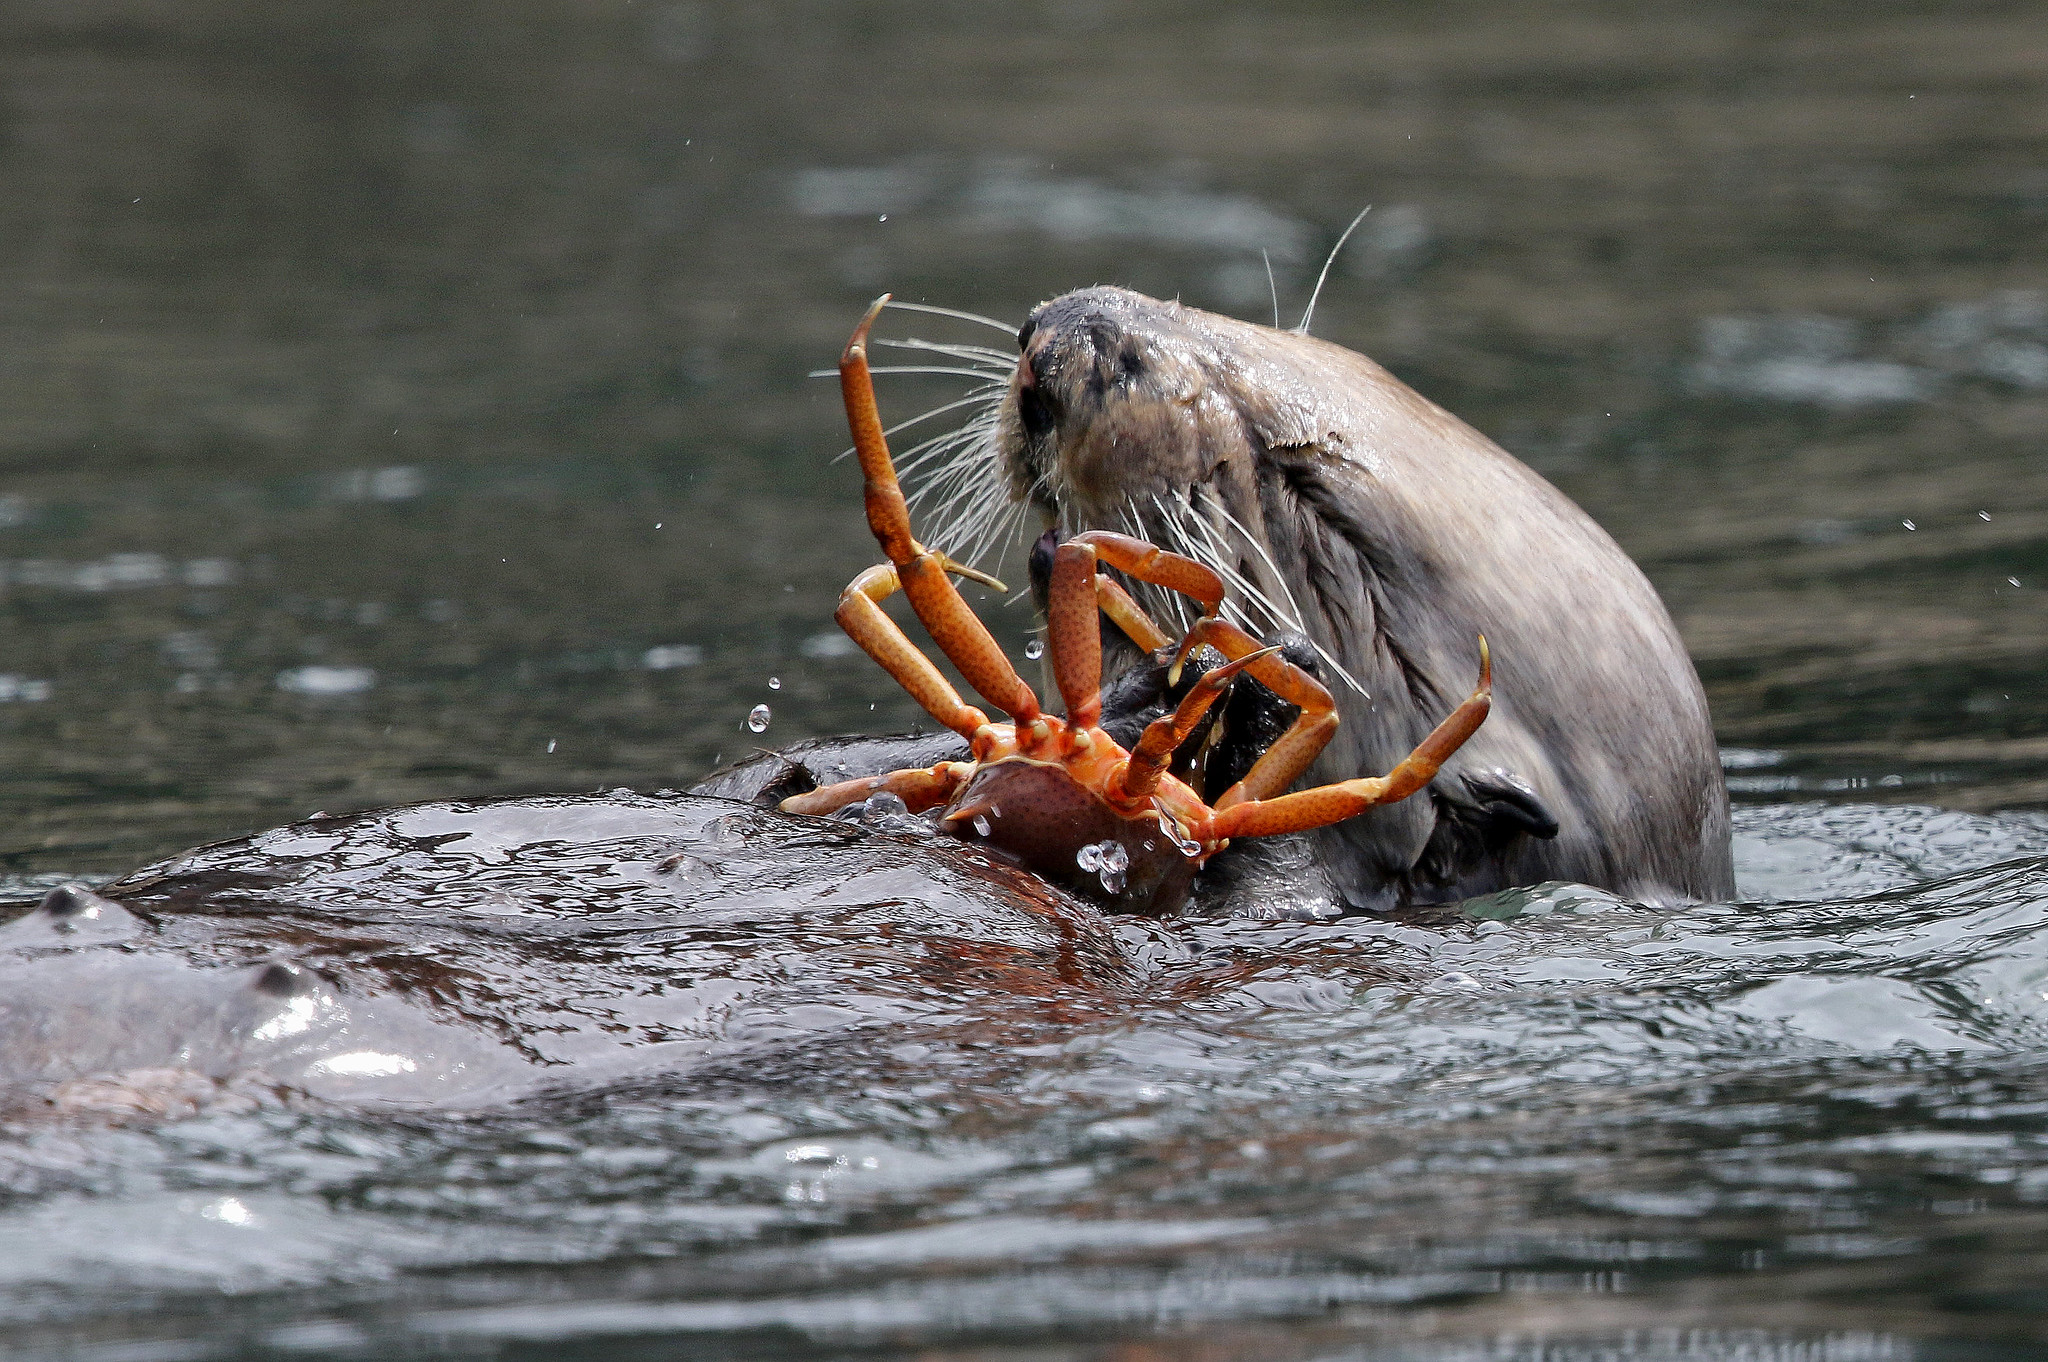 Sea Otter coming up from under the water holding a crab.